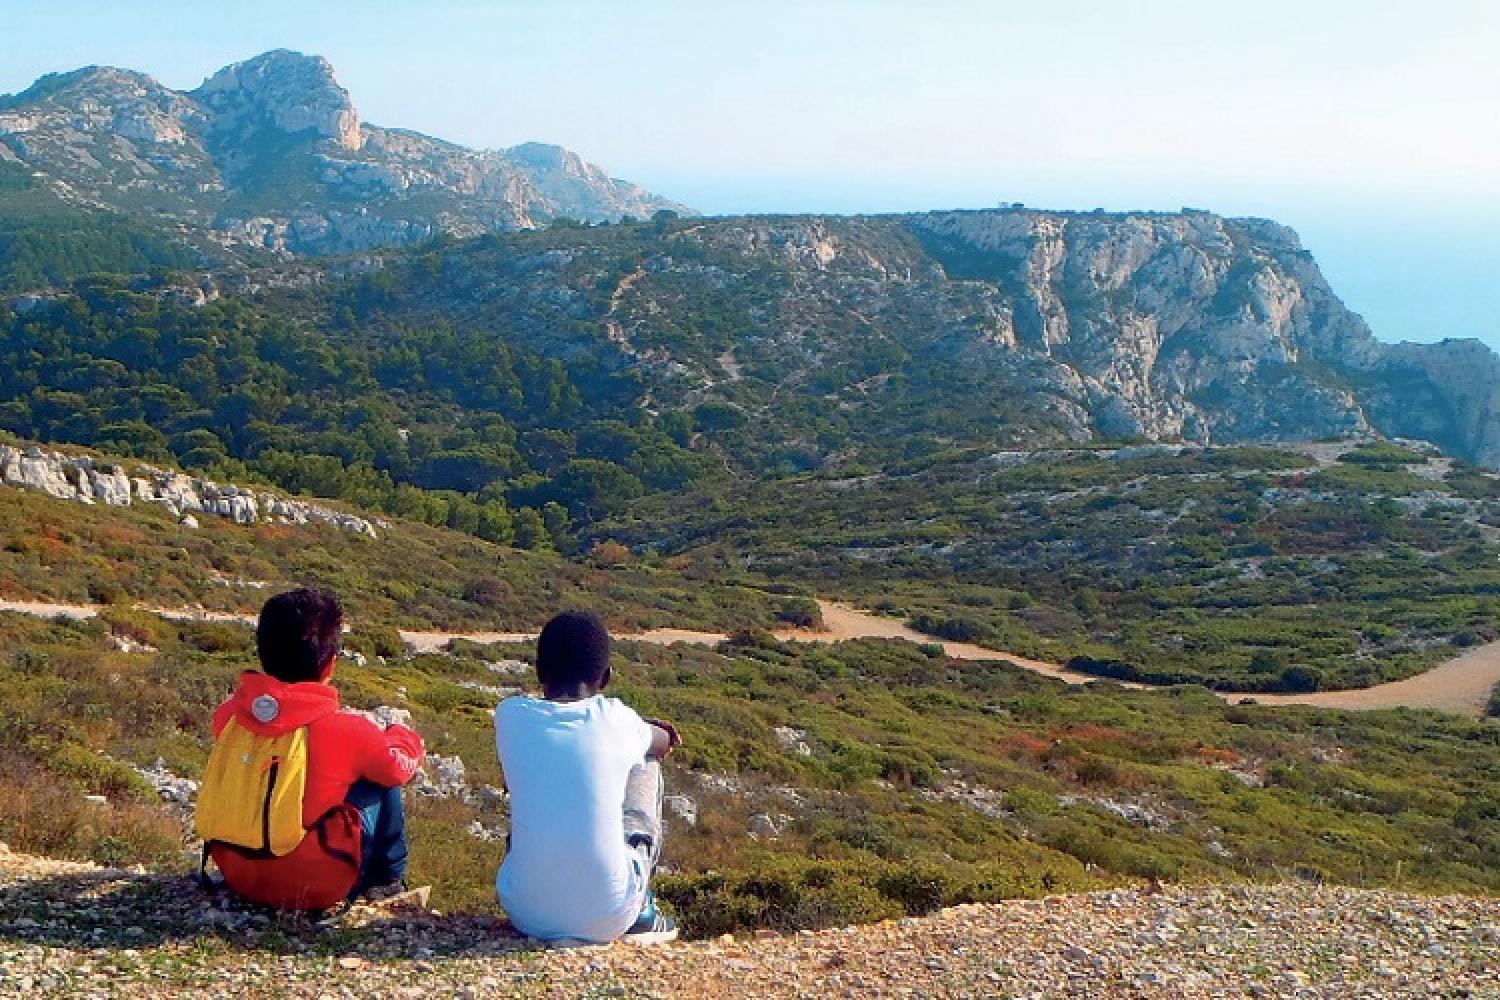 educalanques-sac-a-dos-paysages-calanques-marseille-cassis.jpg